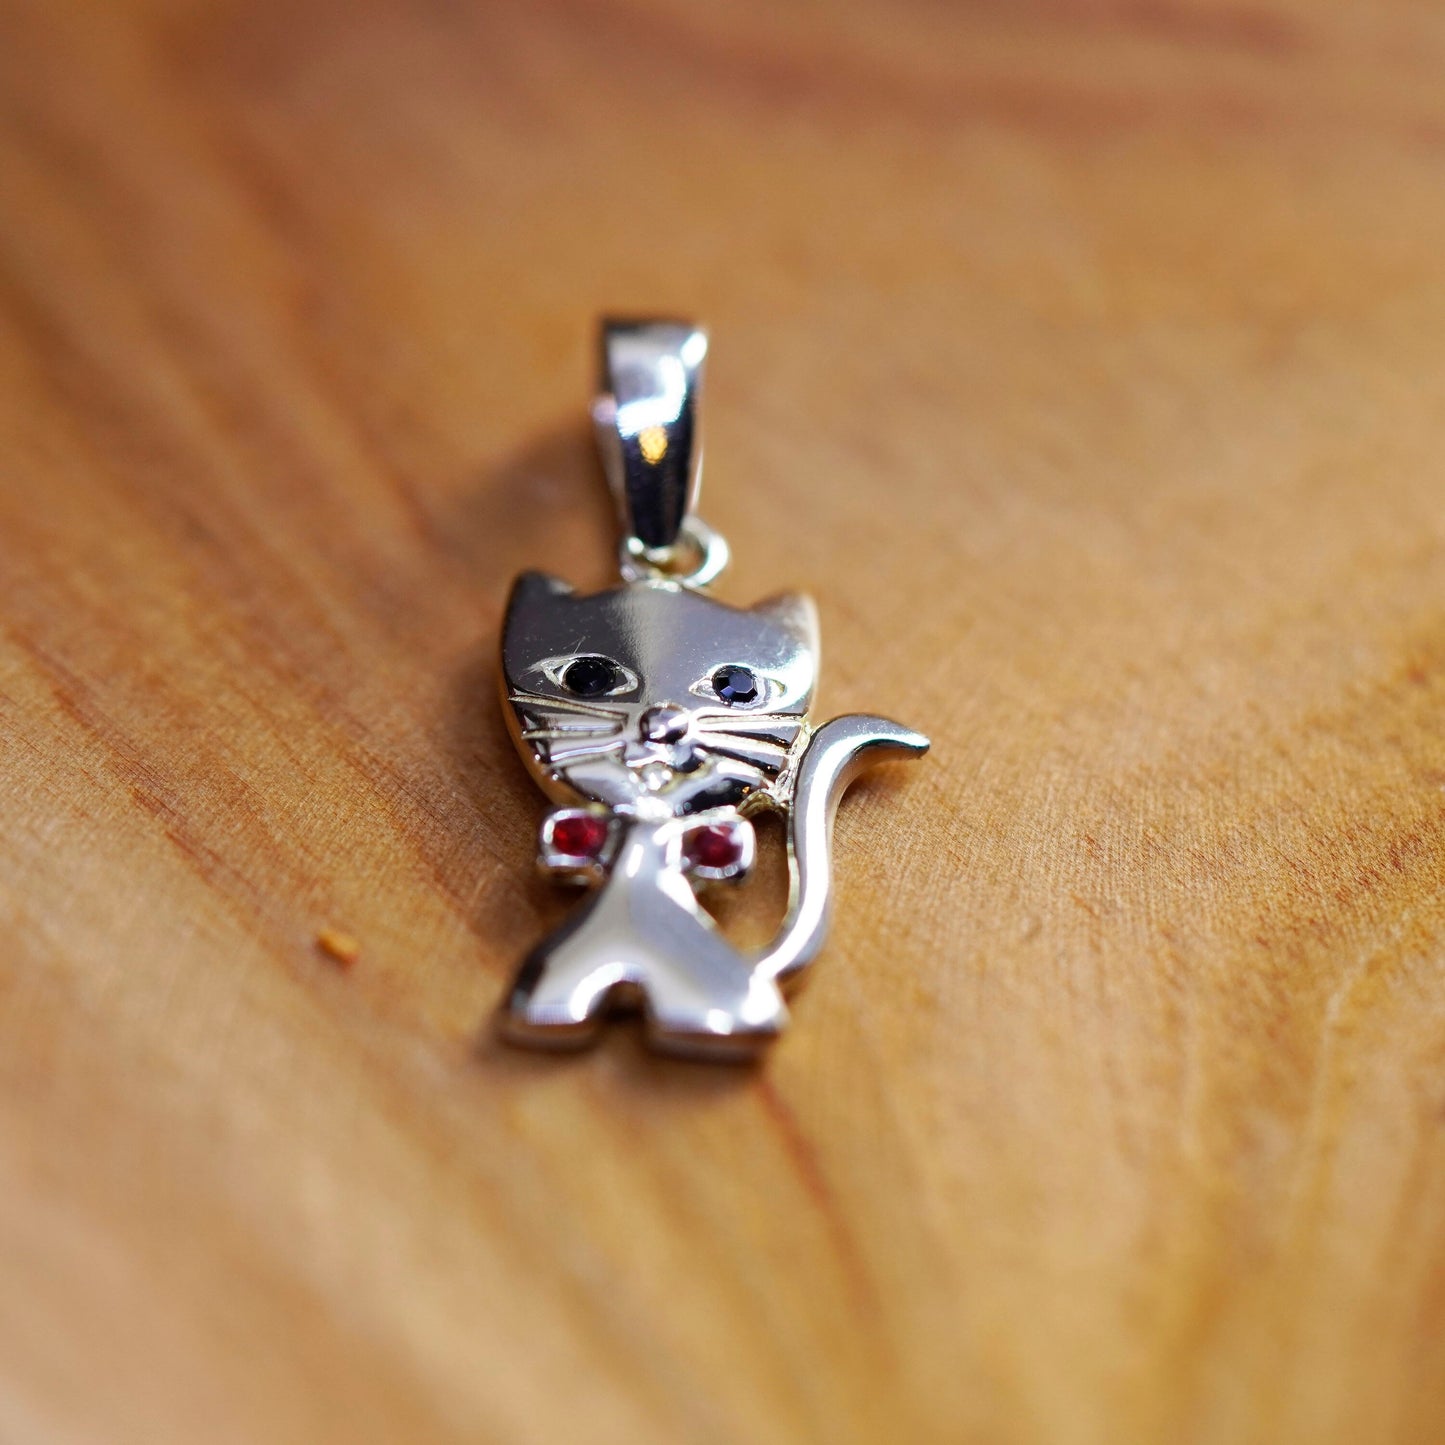 Vintage Sterling silver handmade pendant, 925 cat, kitty charm with crystal